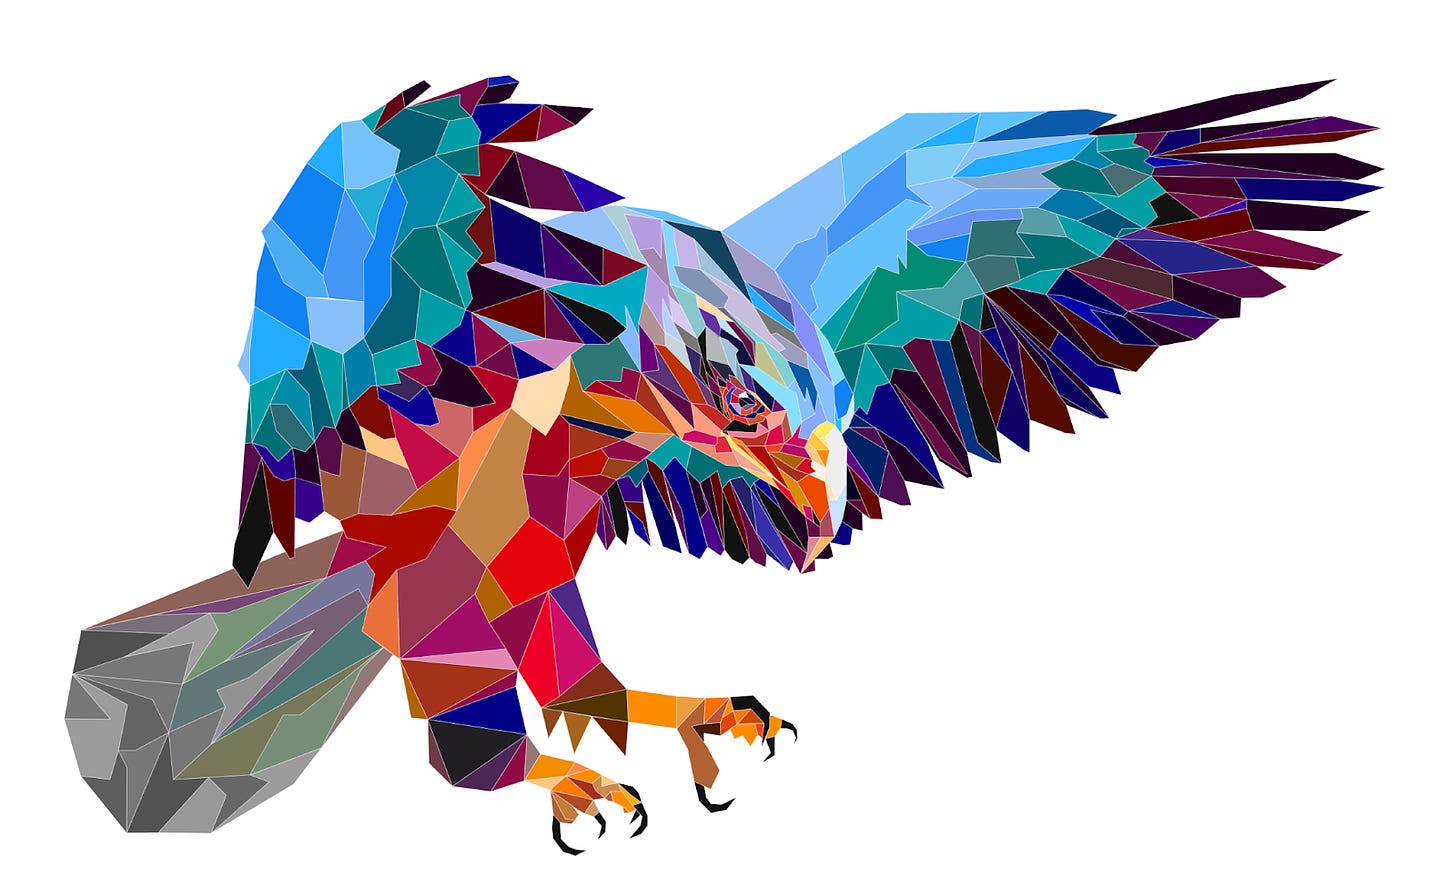 An image of an eagle made up of polygons.